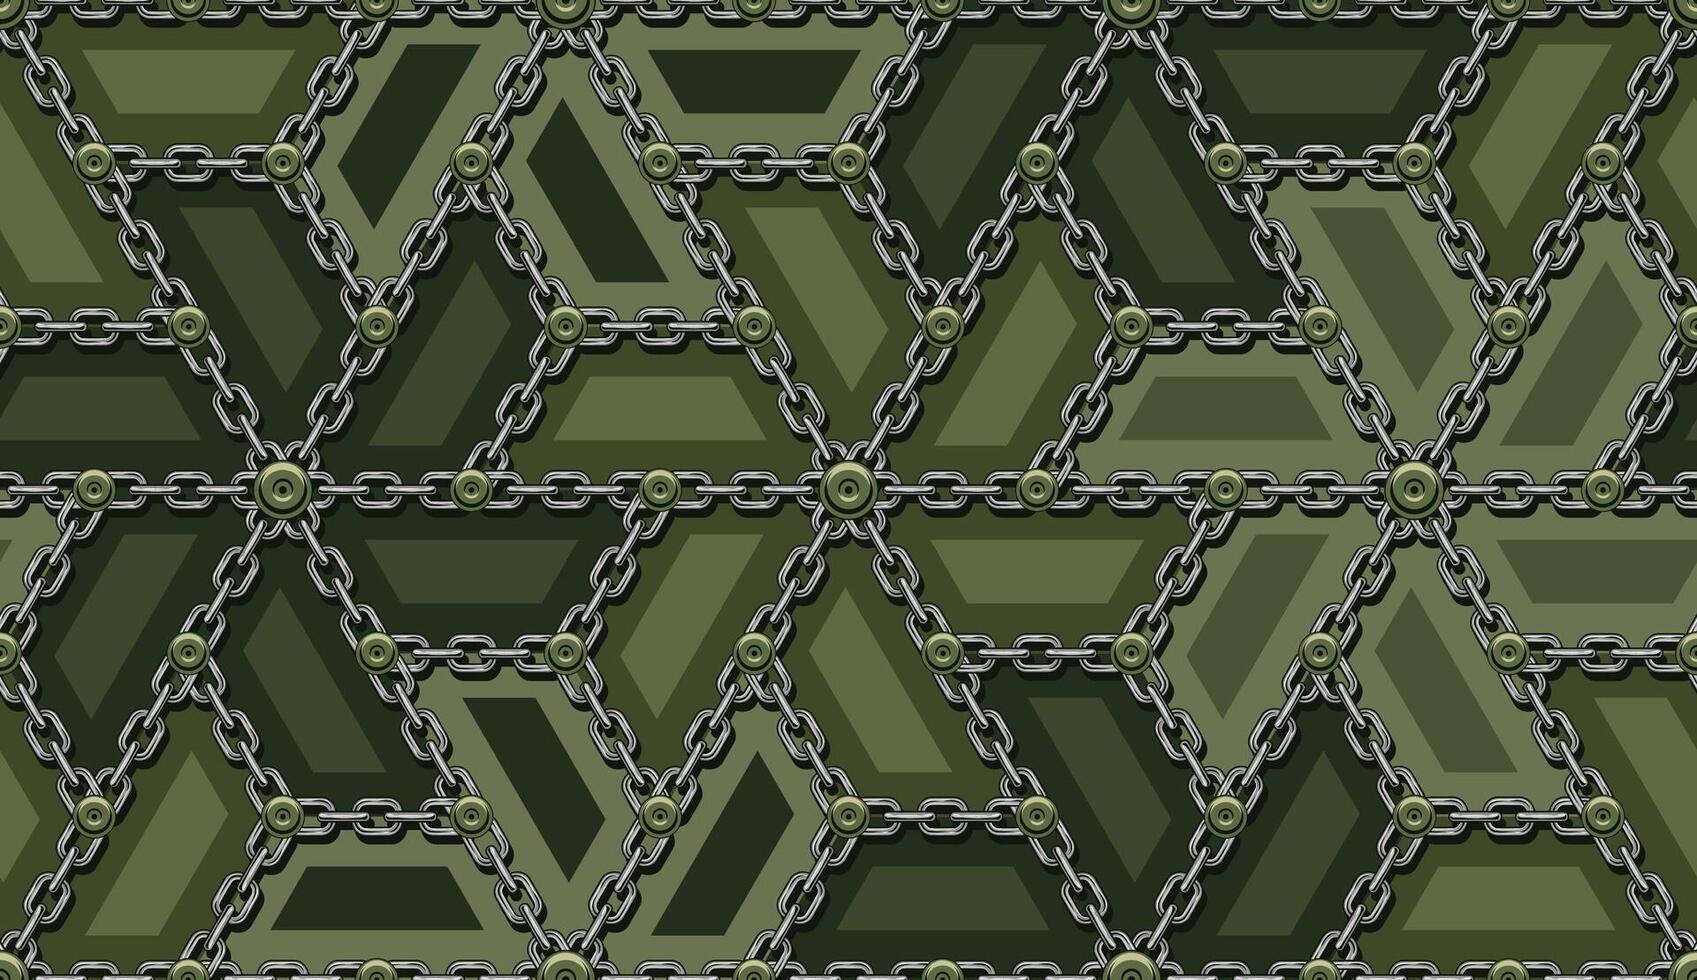 Seamless green camouflage pattern with steel cable chains. Geometric grid with pattern like propeller shape. Classic design. illustration vector